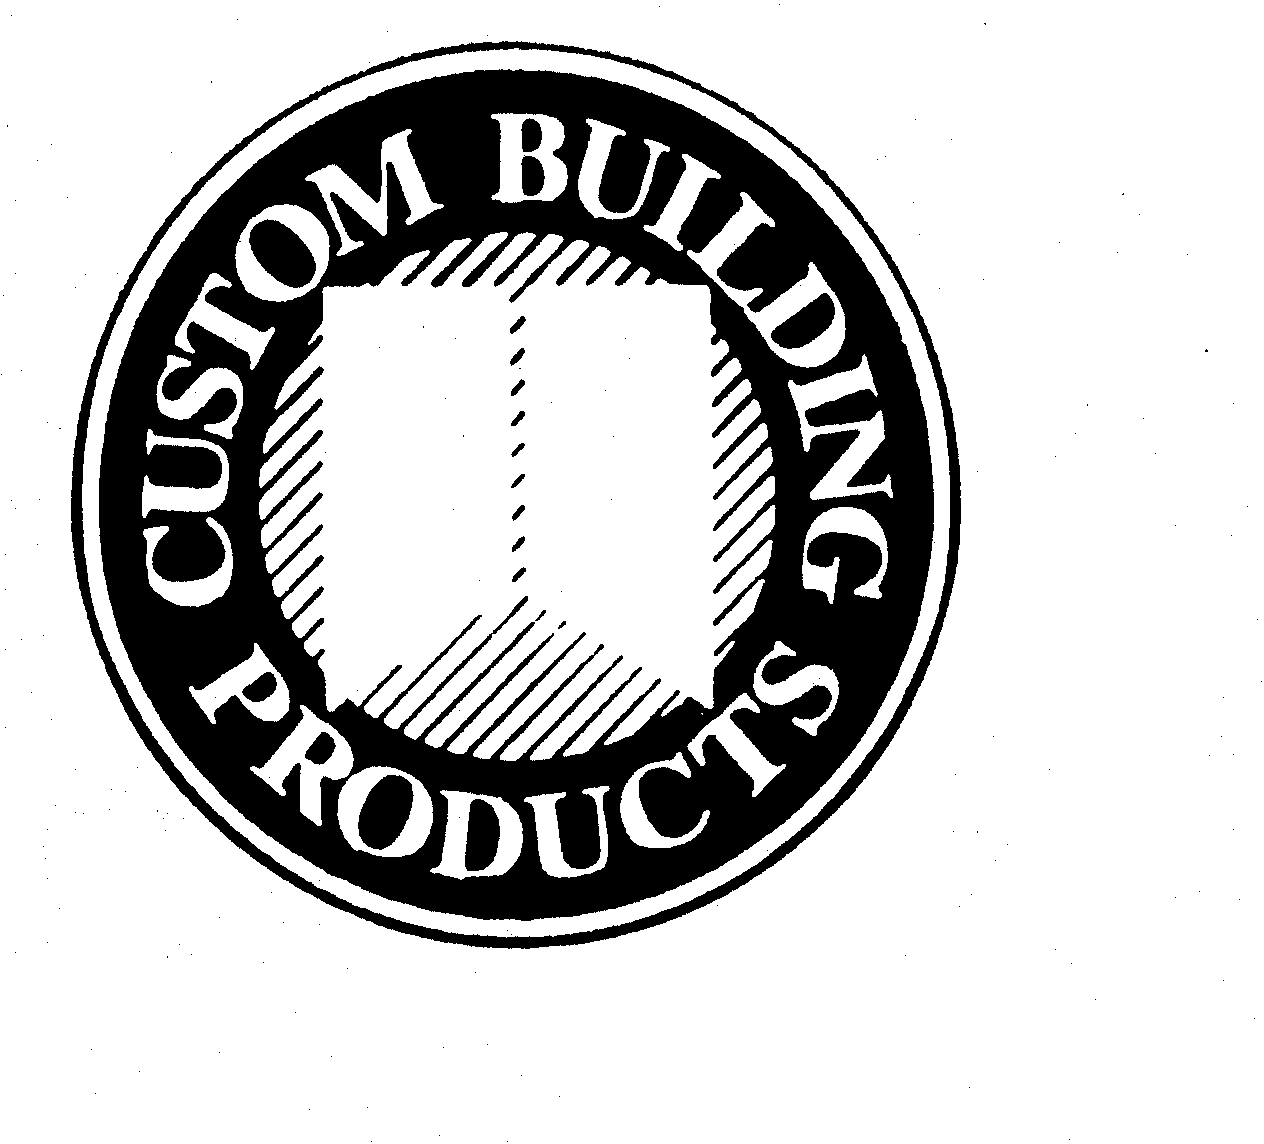  CUSTOM BUILDING PRODUCTS